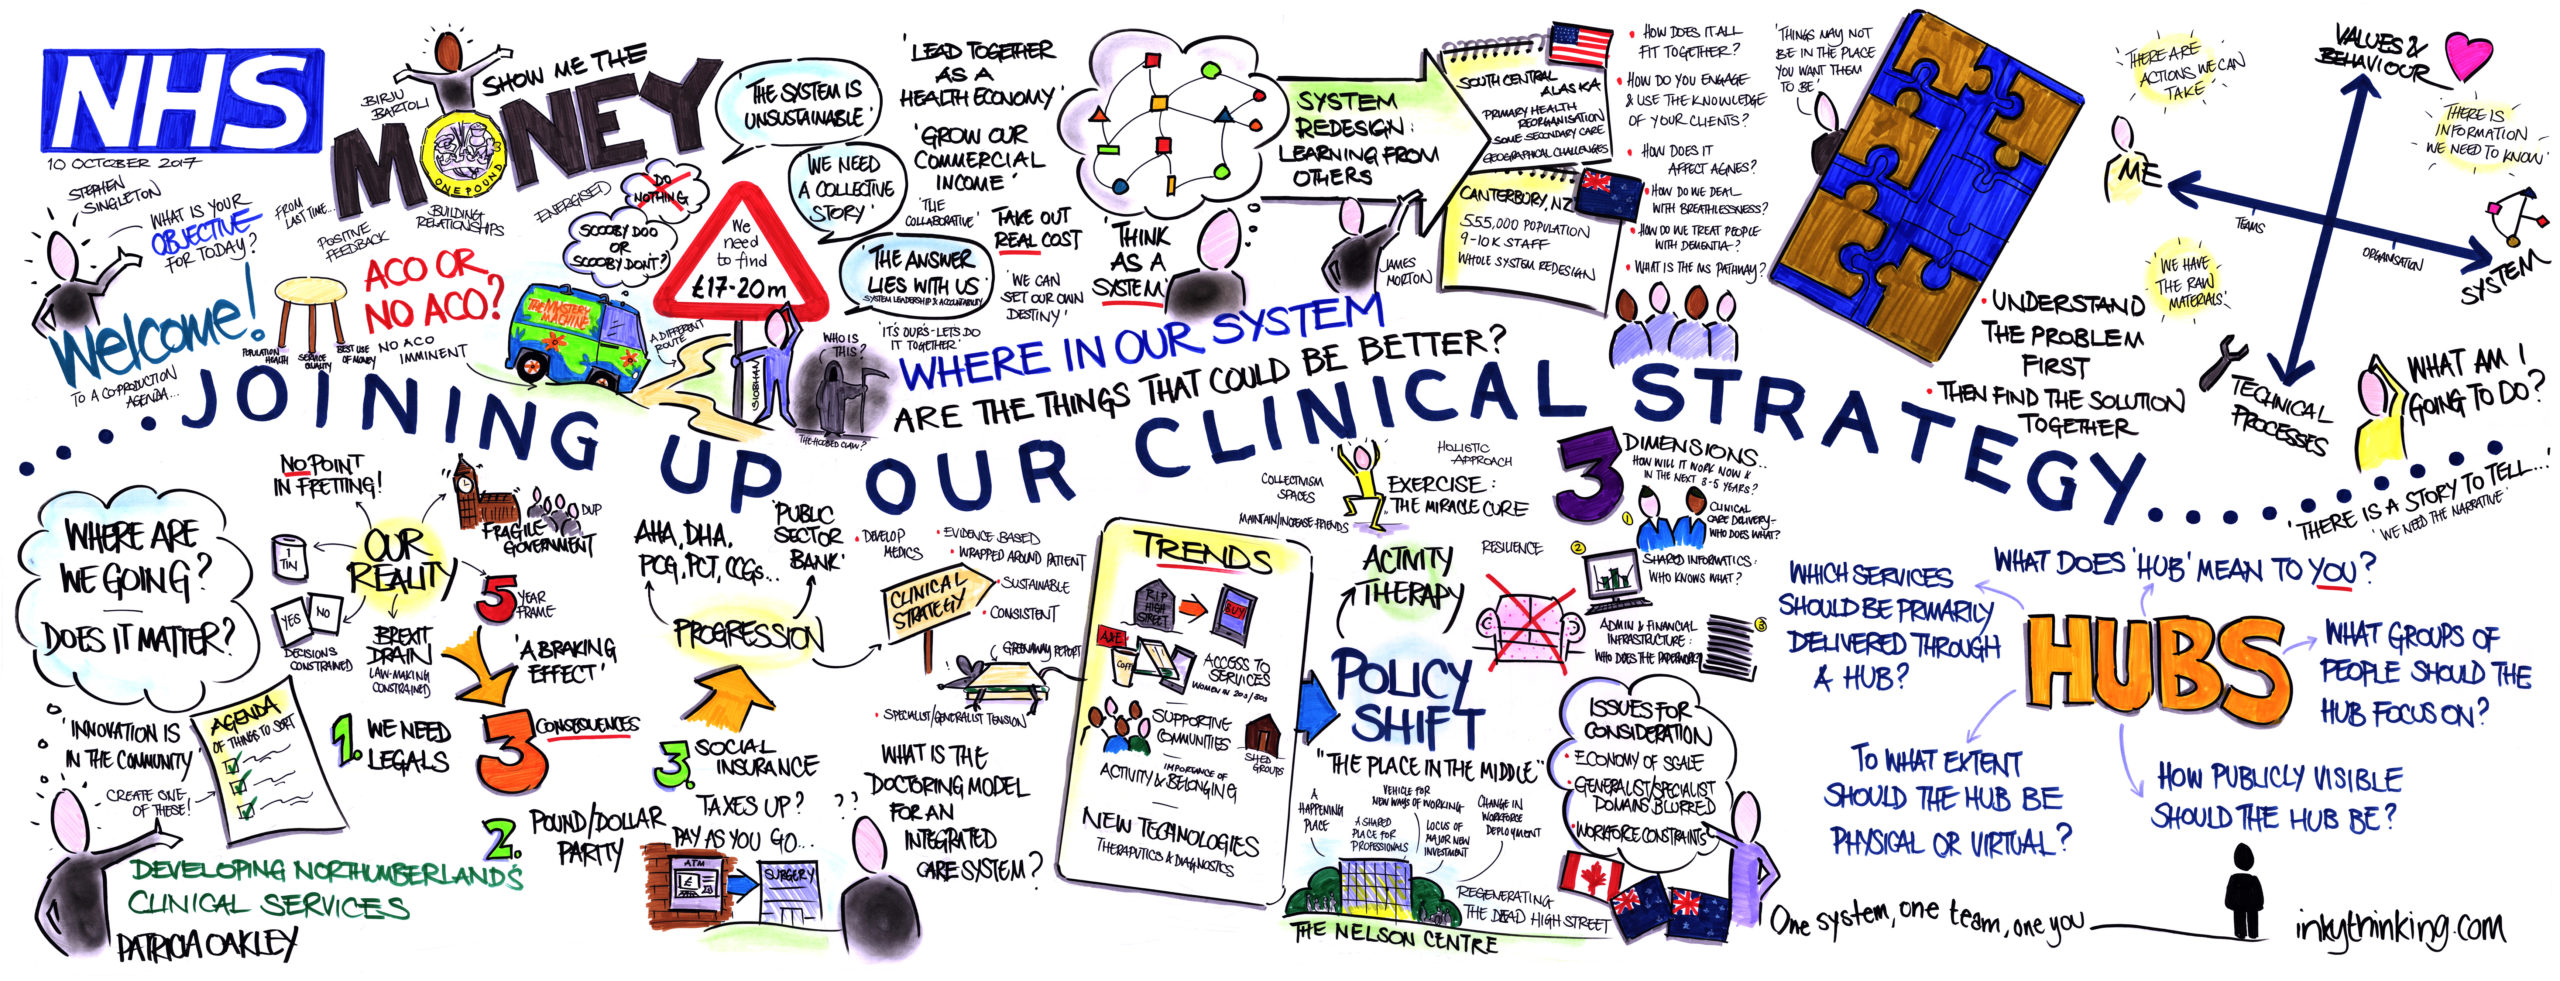 NHS Northumbria Clinical Strategy October 2017